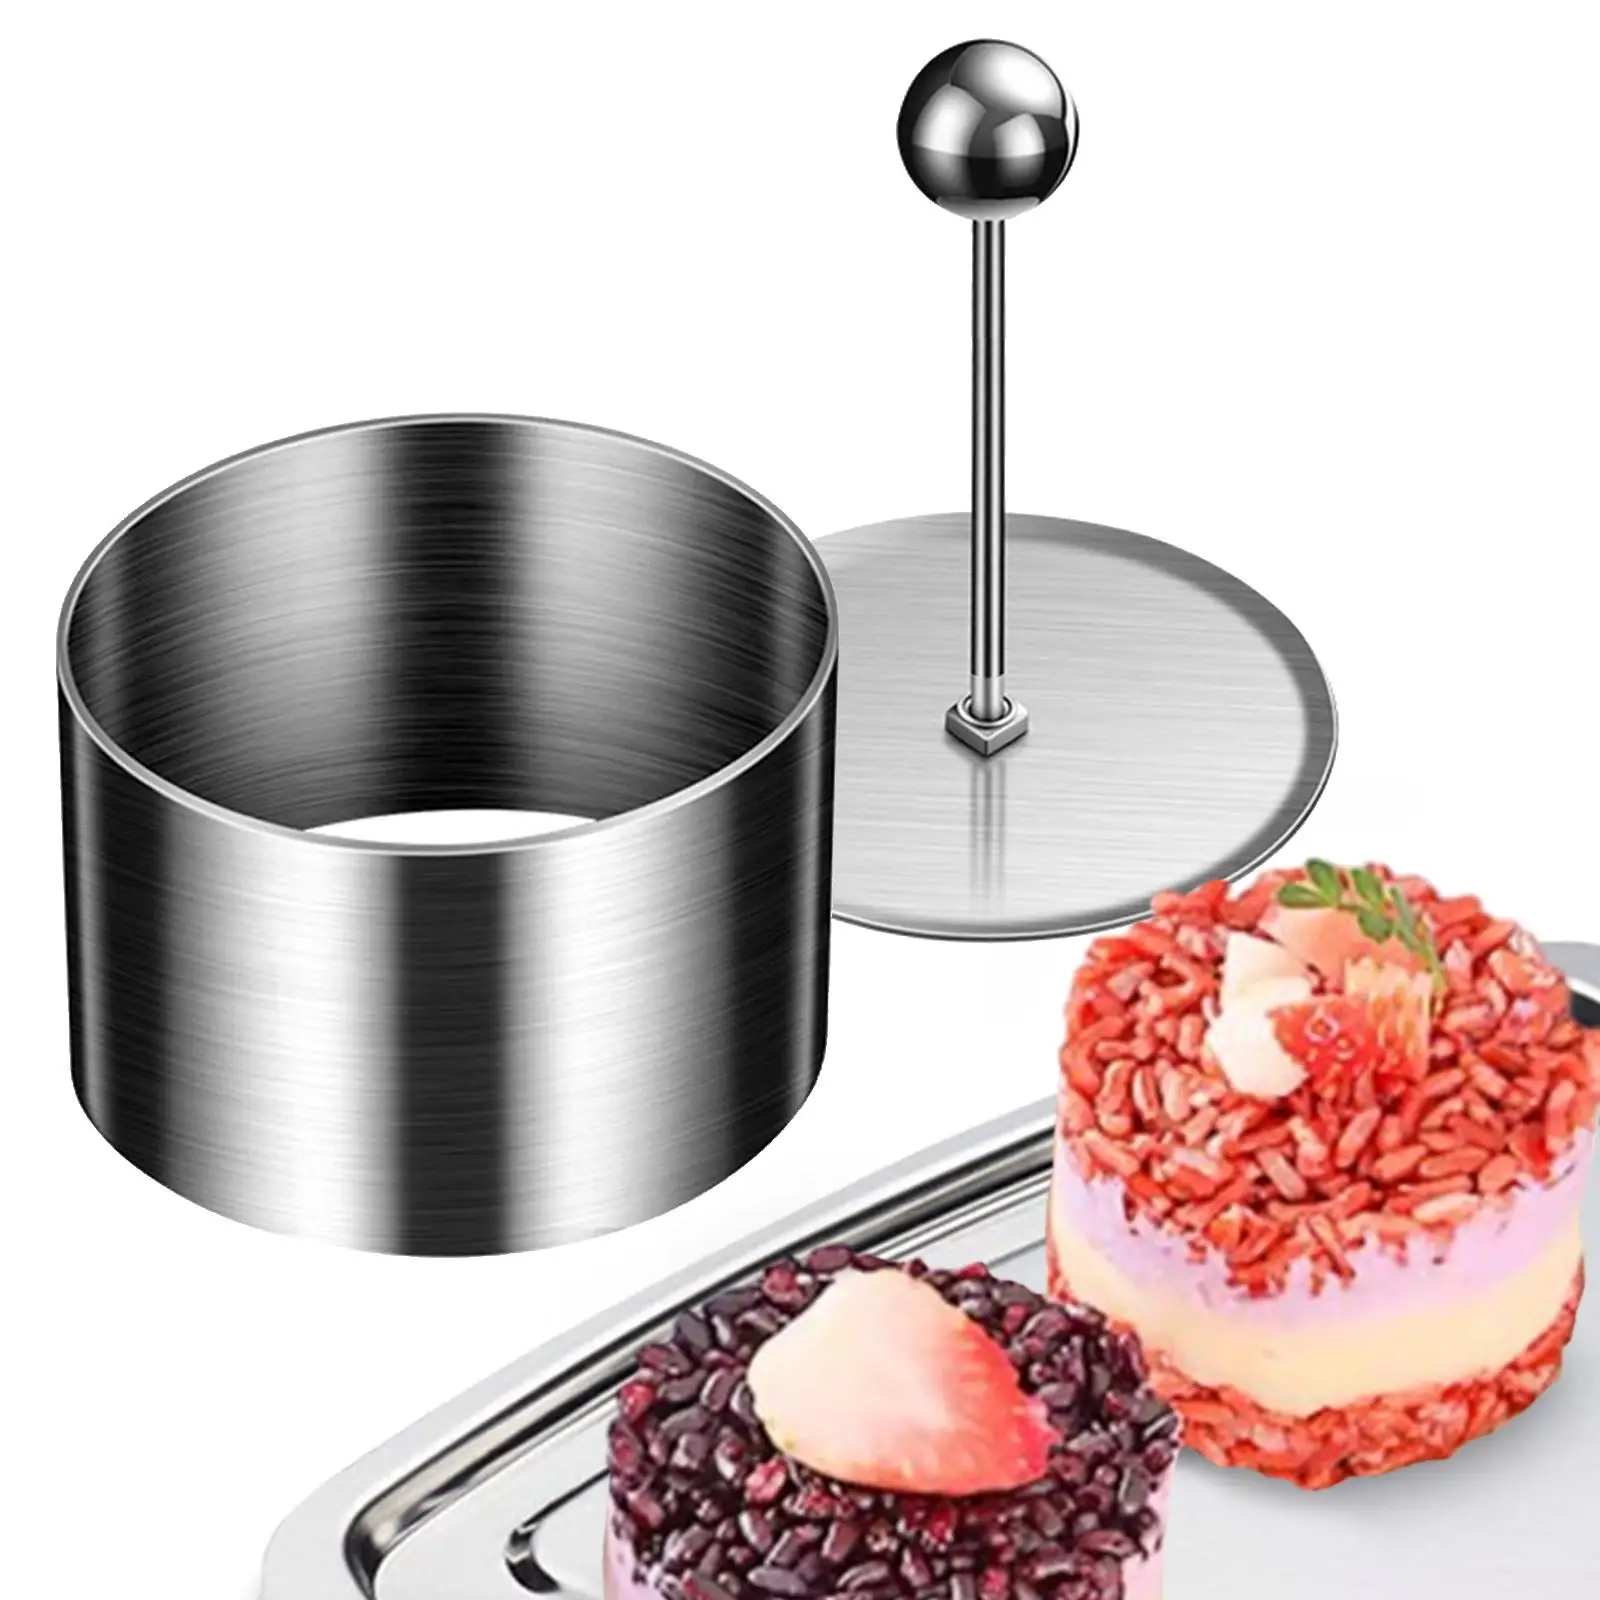 Stainless Steel Food Ring Cupcake Decorating Tools Pastry Rings Mini Baking Ring Maker for Mousse Scones Pie Bread Dessert